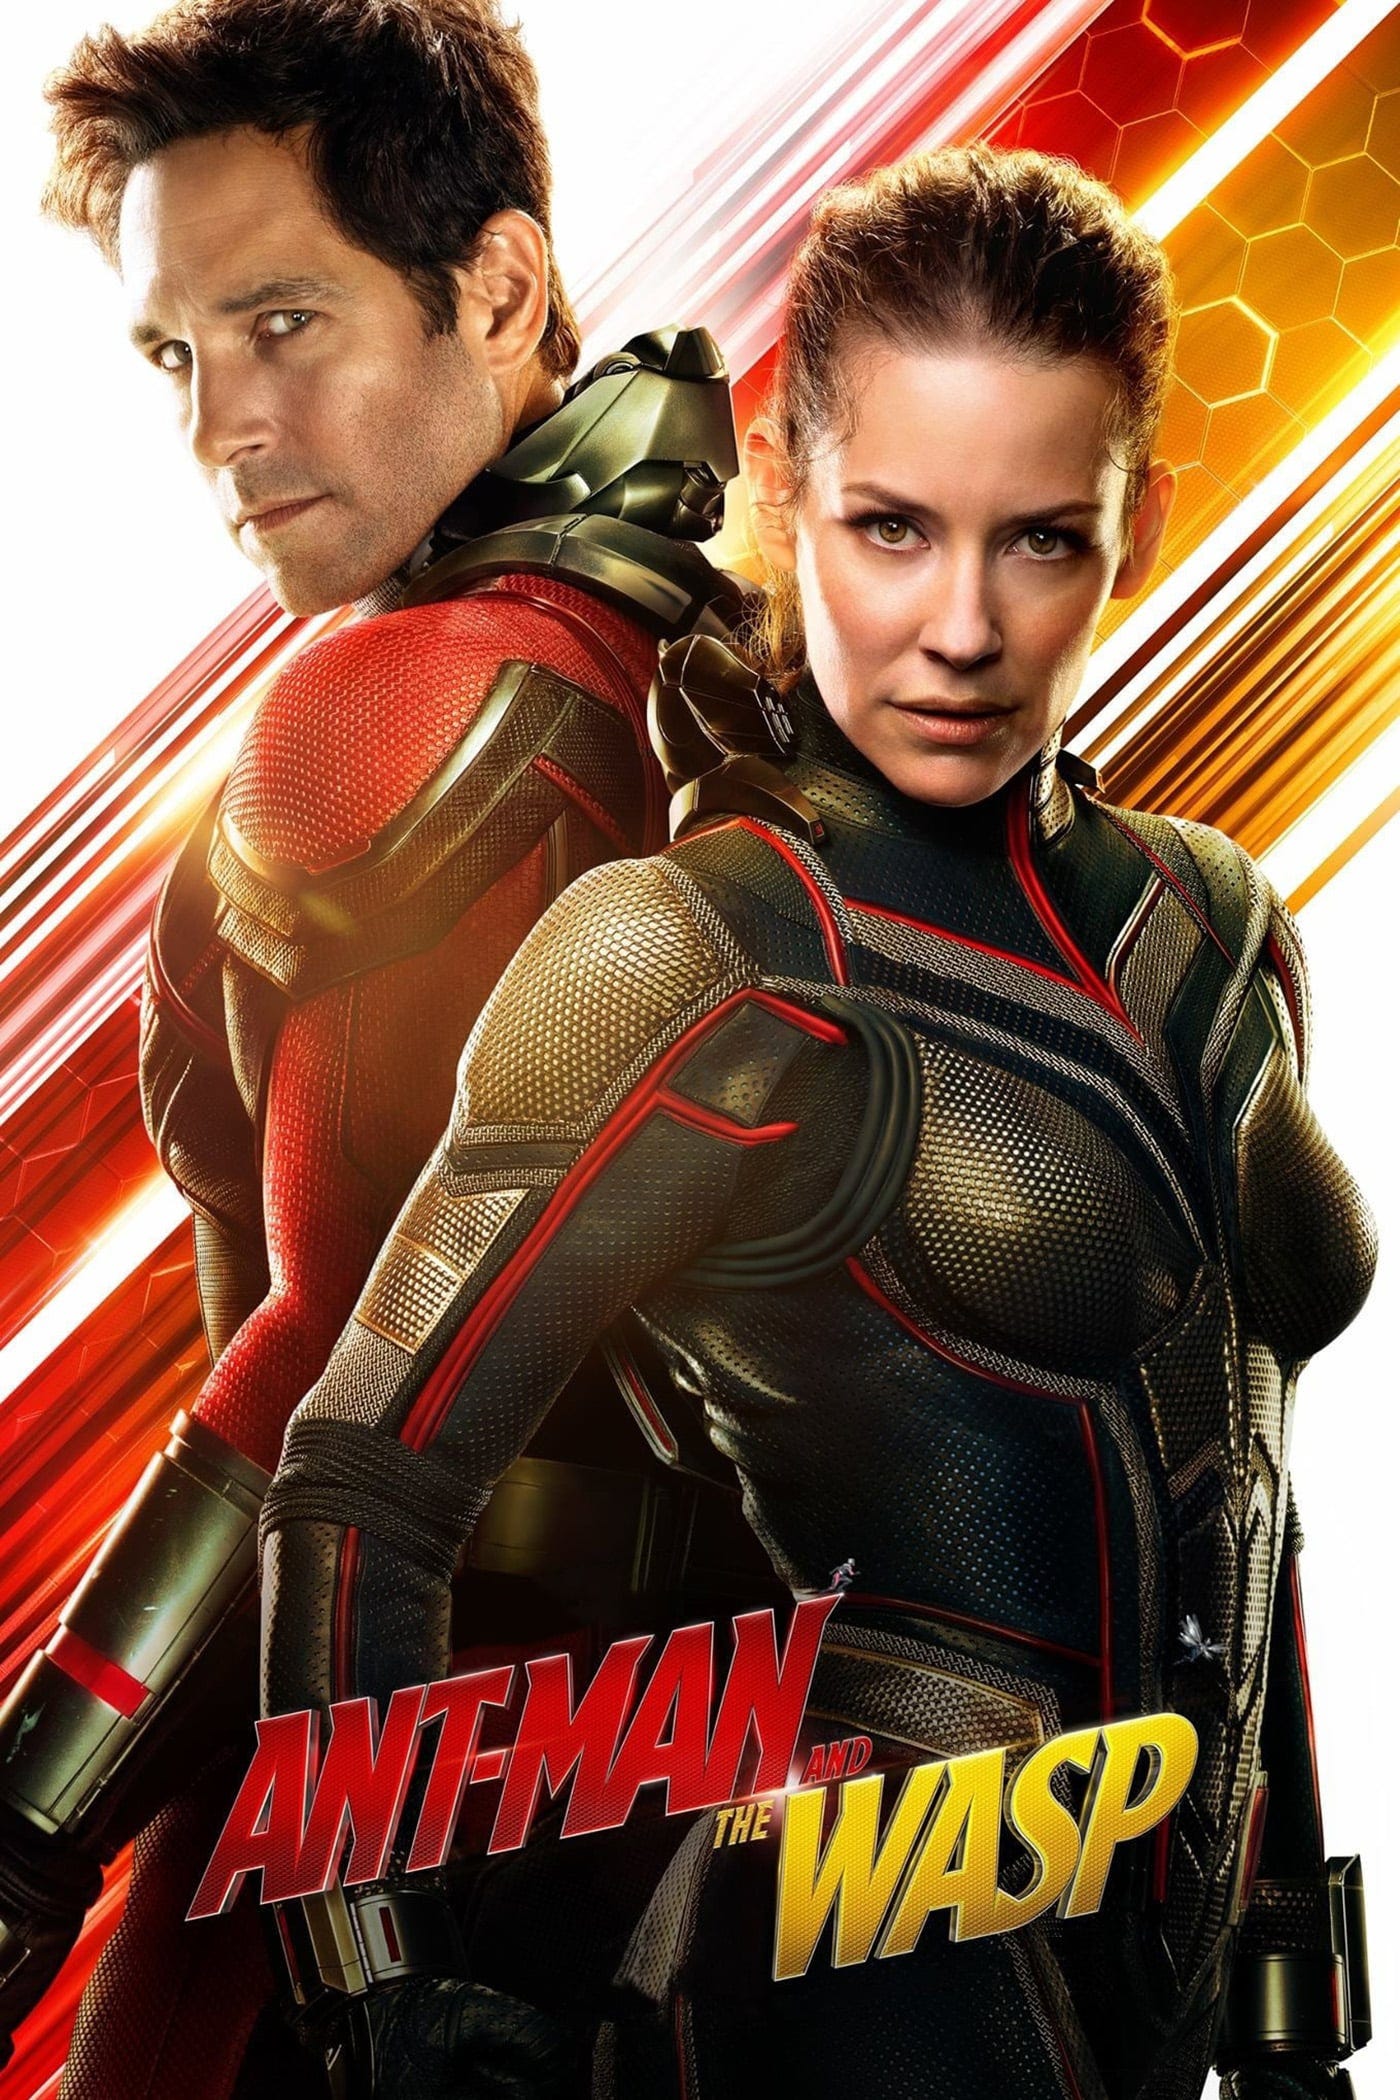 WATCH MOVIE FULL) Ant-Man and the Wasp HD Free Download (2018)